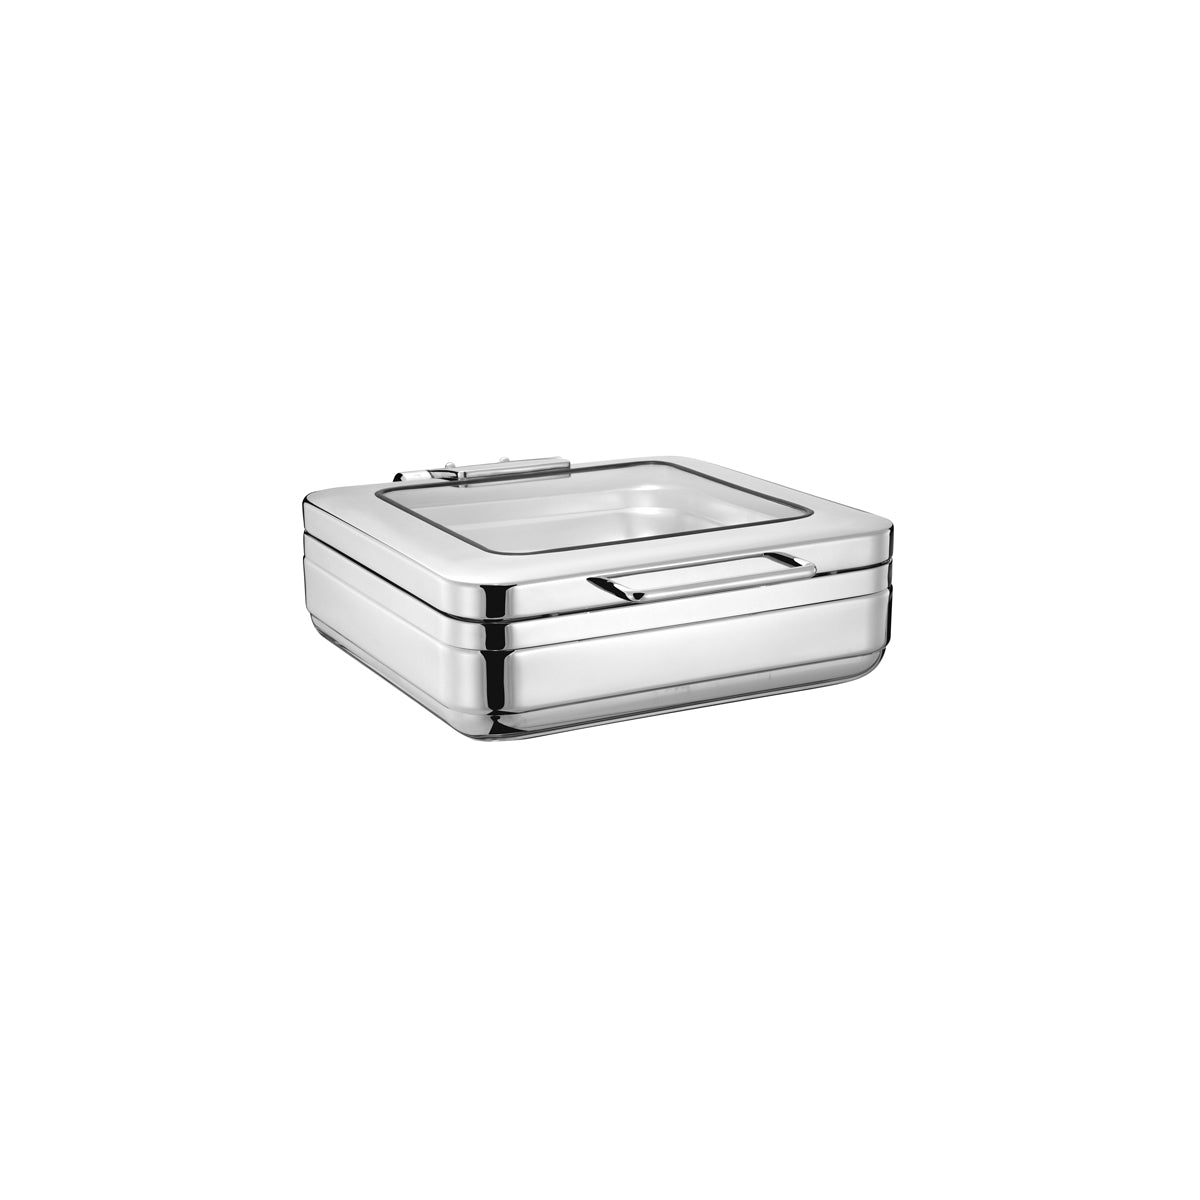 54903 Chef Inox Induction Chafer 18/8 Stainless Steel 2/3 Size with Glass Lid Tomkin Australia Hospitality Supplies